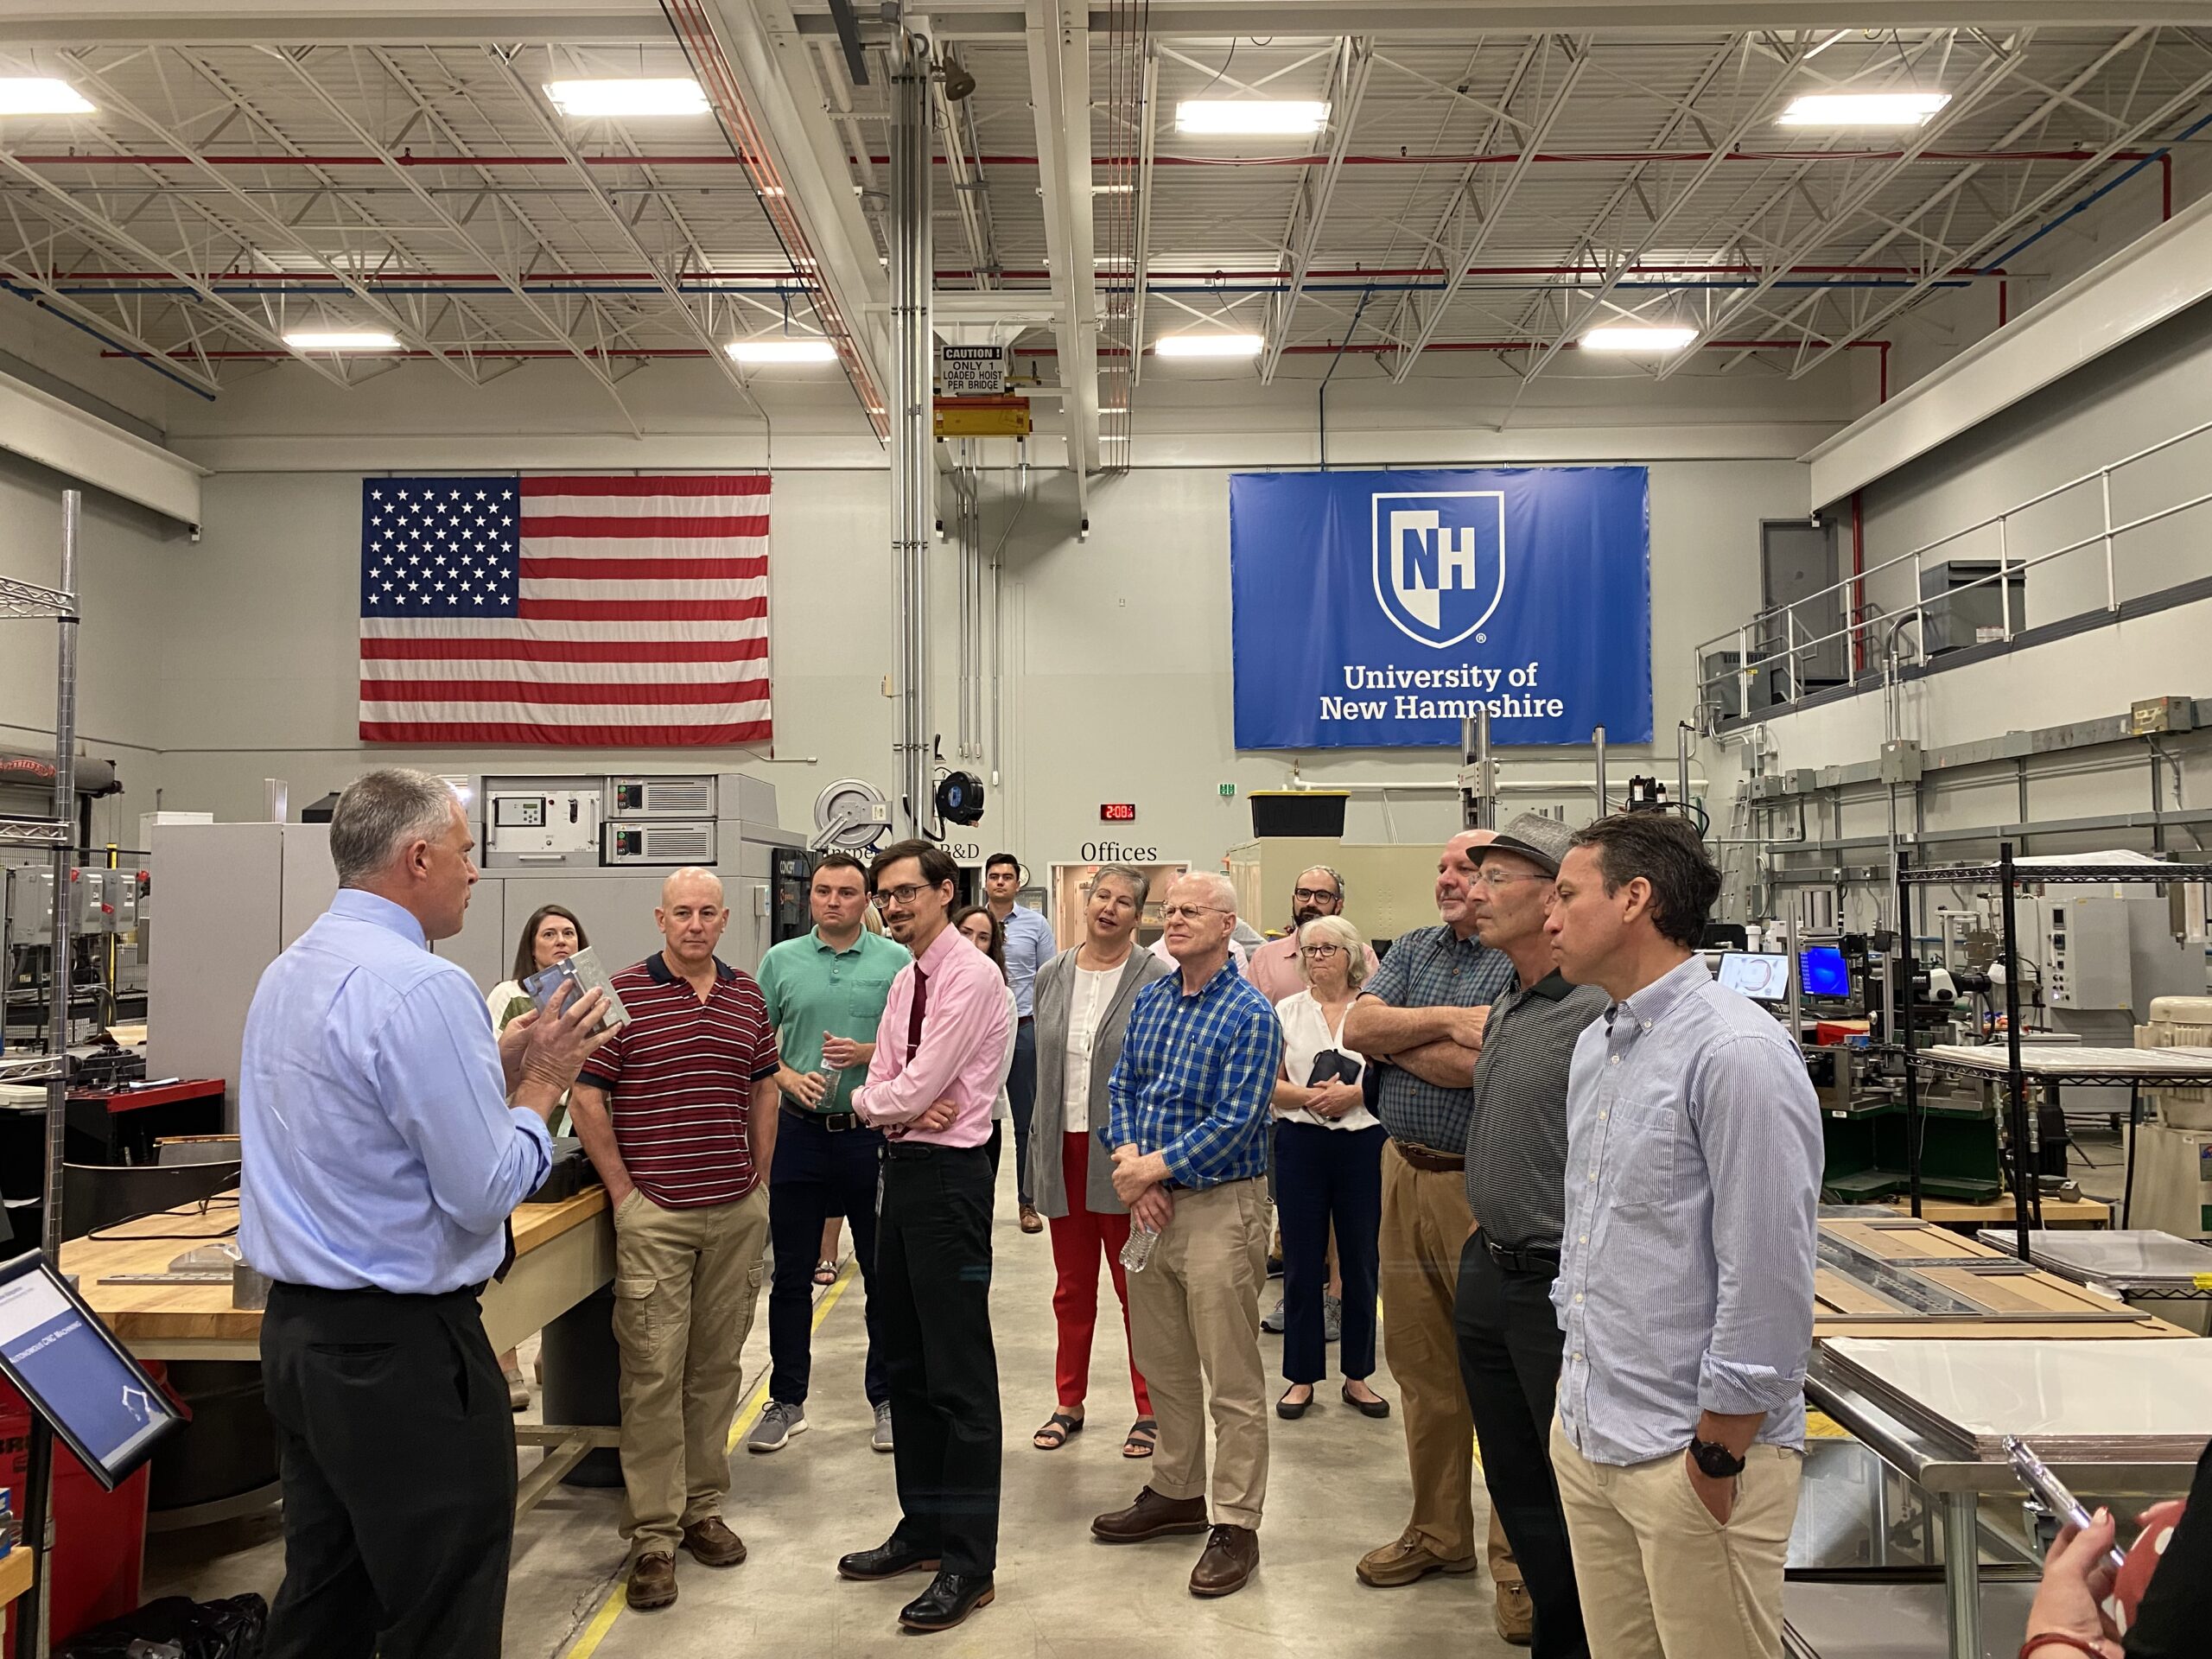 SEDS members taking a tour of the John Olson Advanced Manufacturing Center at UNH